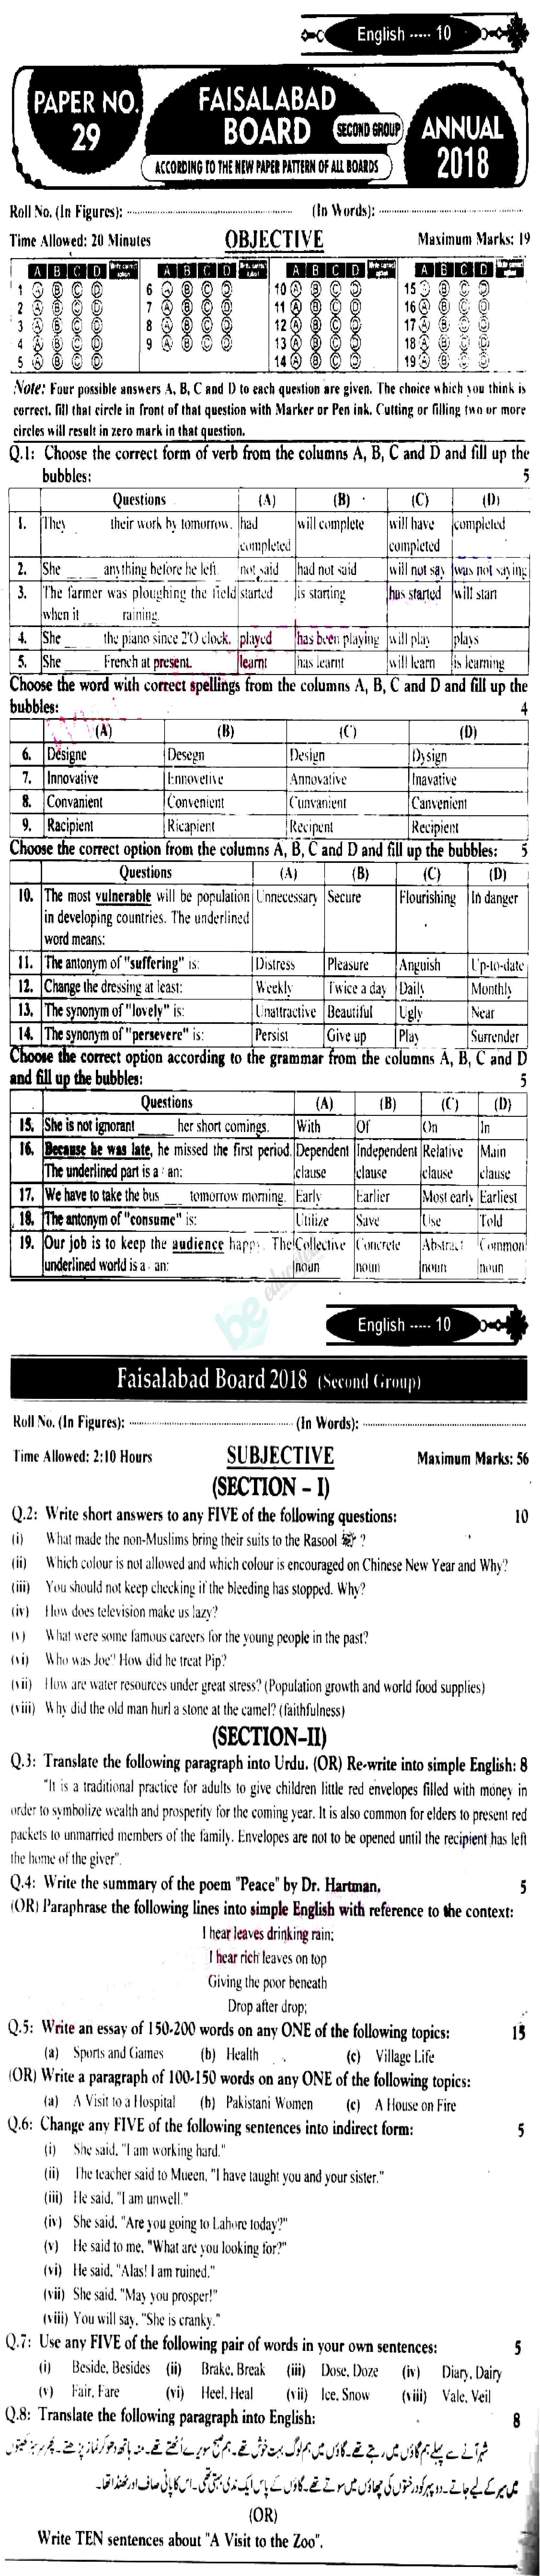 English 10th class Past Paper Group 2 BISE Faisalabad 2018